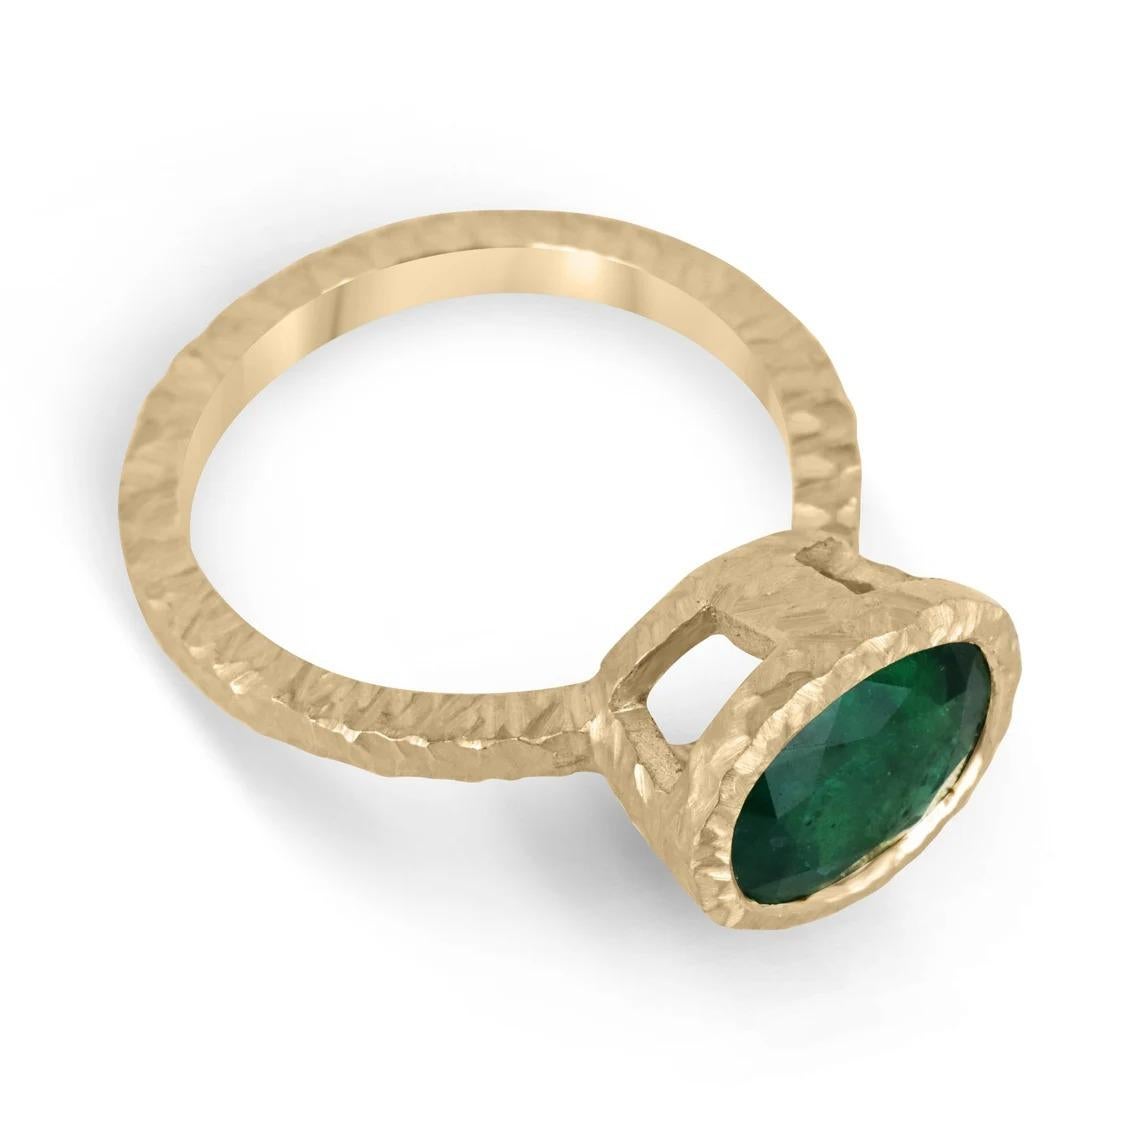 The perfect solitaire doesn't exis- BEHOLD! This remarkable emerald solitaire ring is sure to turn heads anywhere you may take it. This piece features a fine quality, triple-a-grade natural emerald cut into the shape of an oval. The gemstone